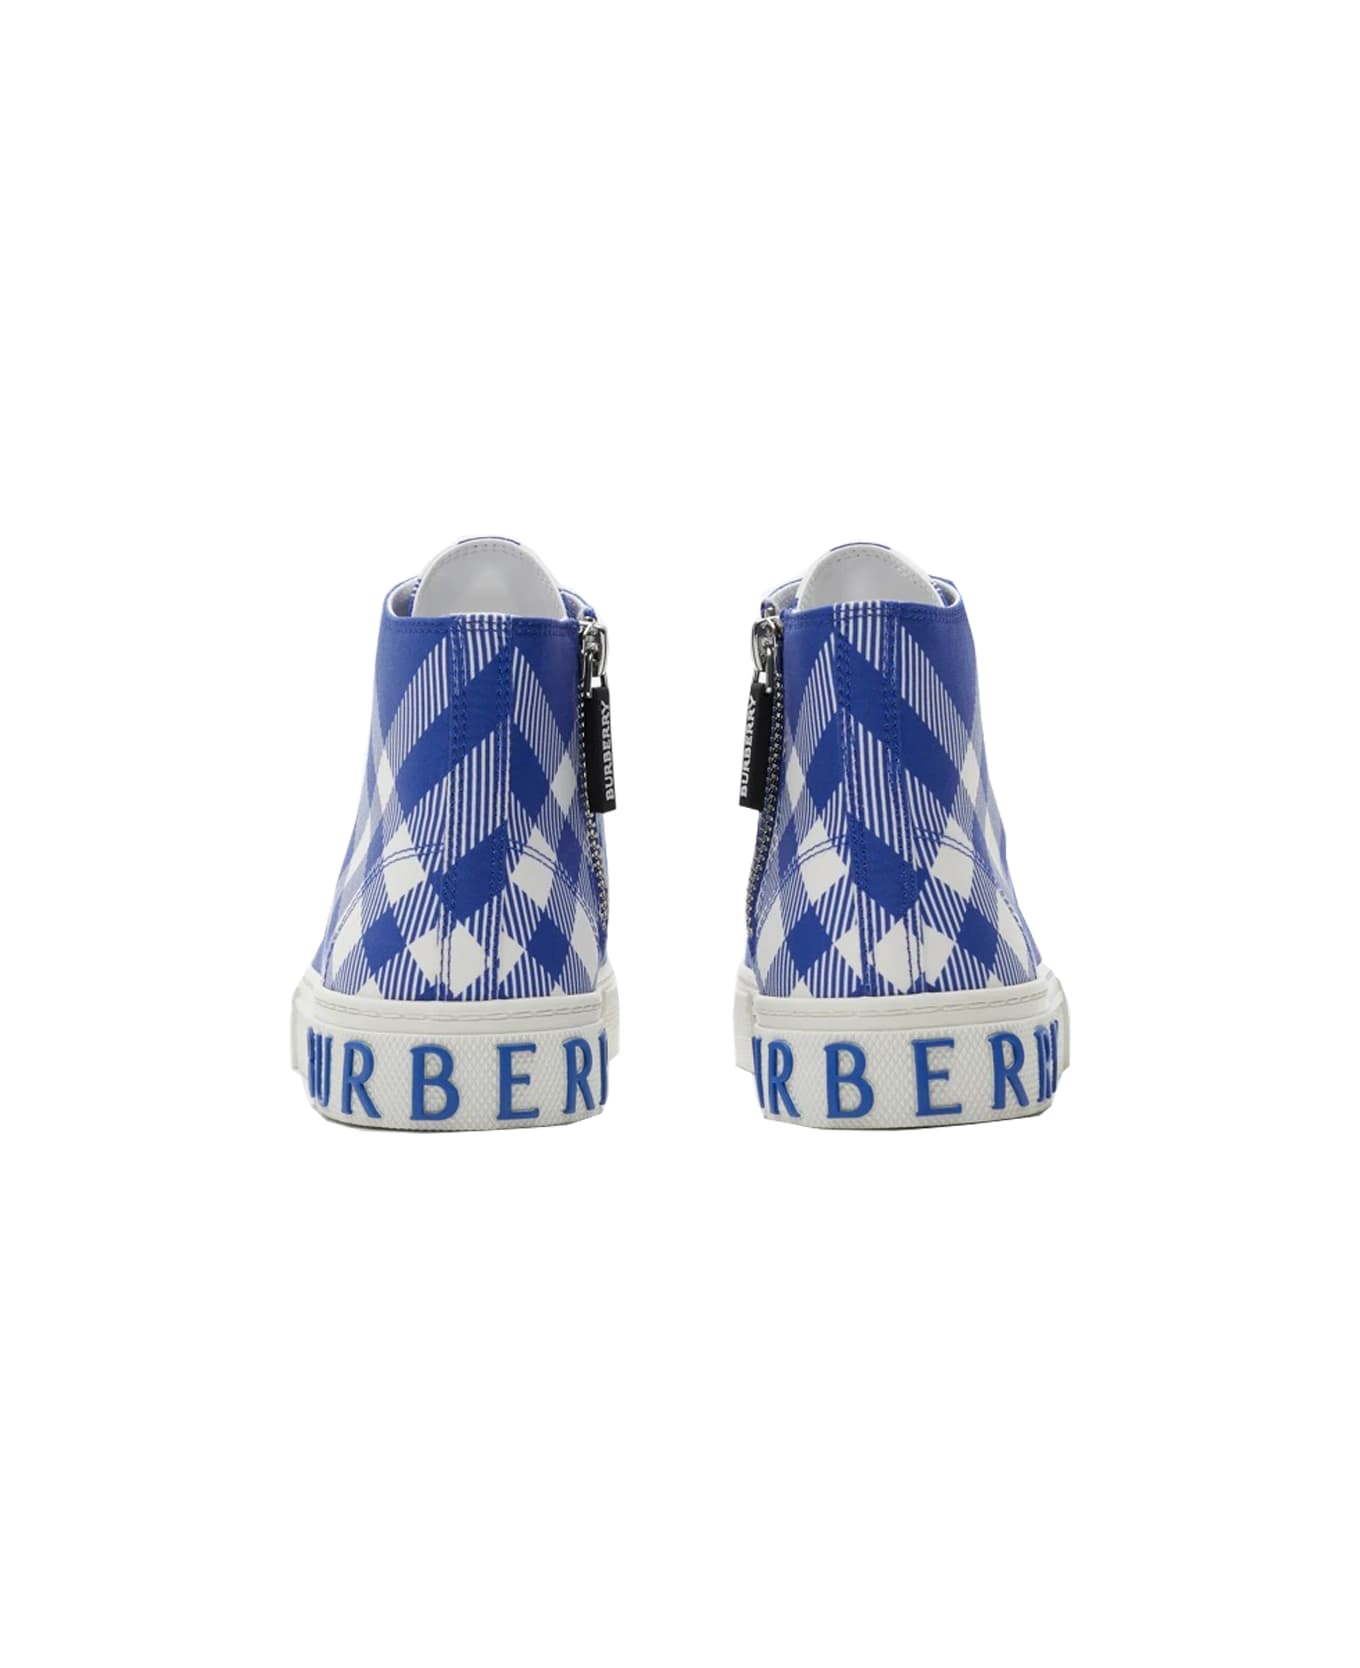 Burberry High Sneakers In Checked Cotton - Blue シューズ